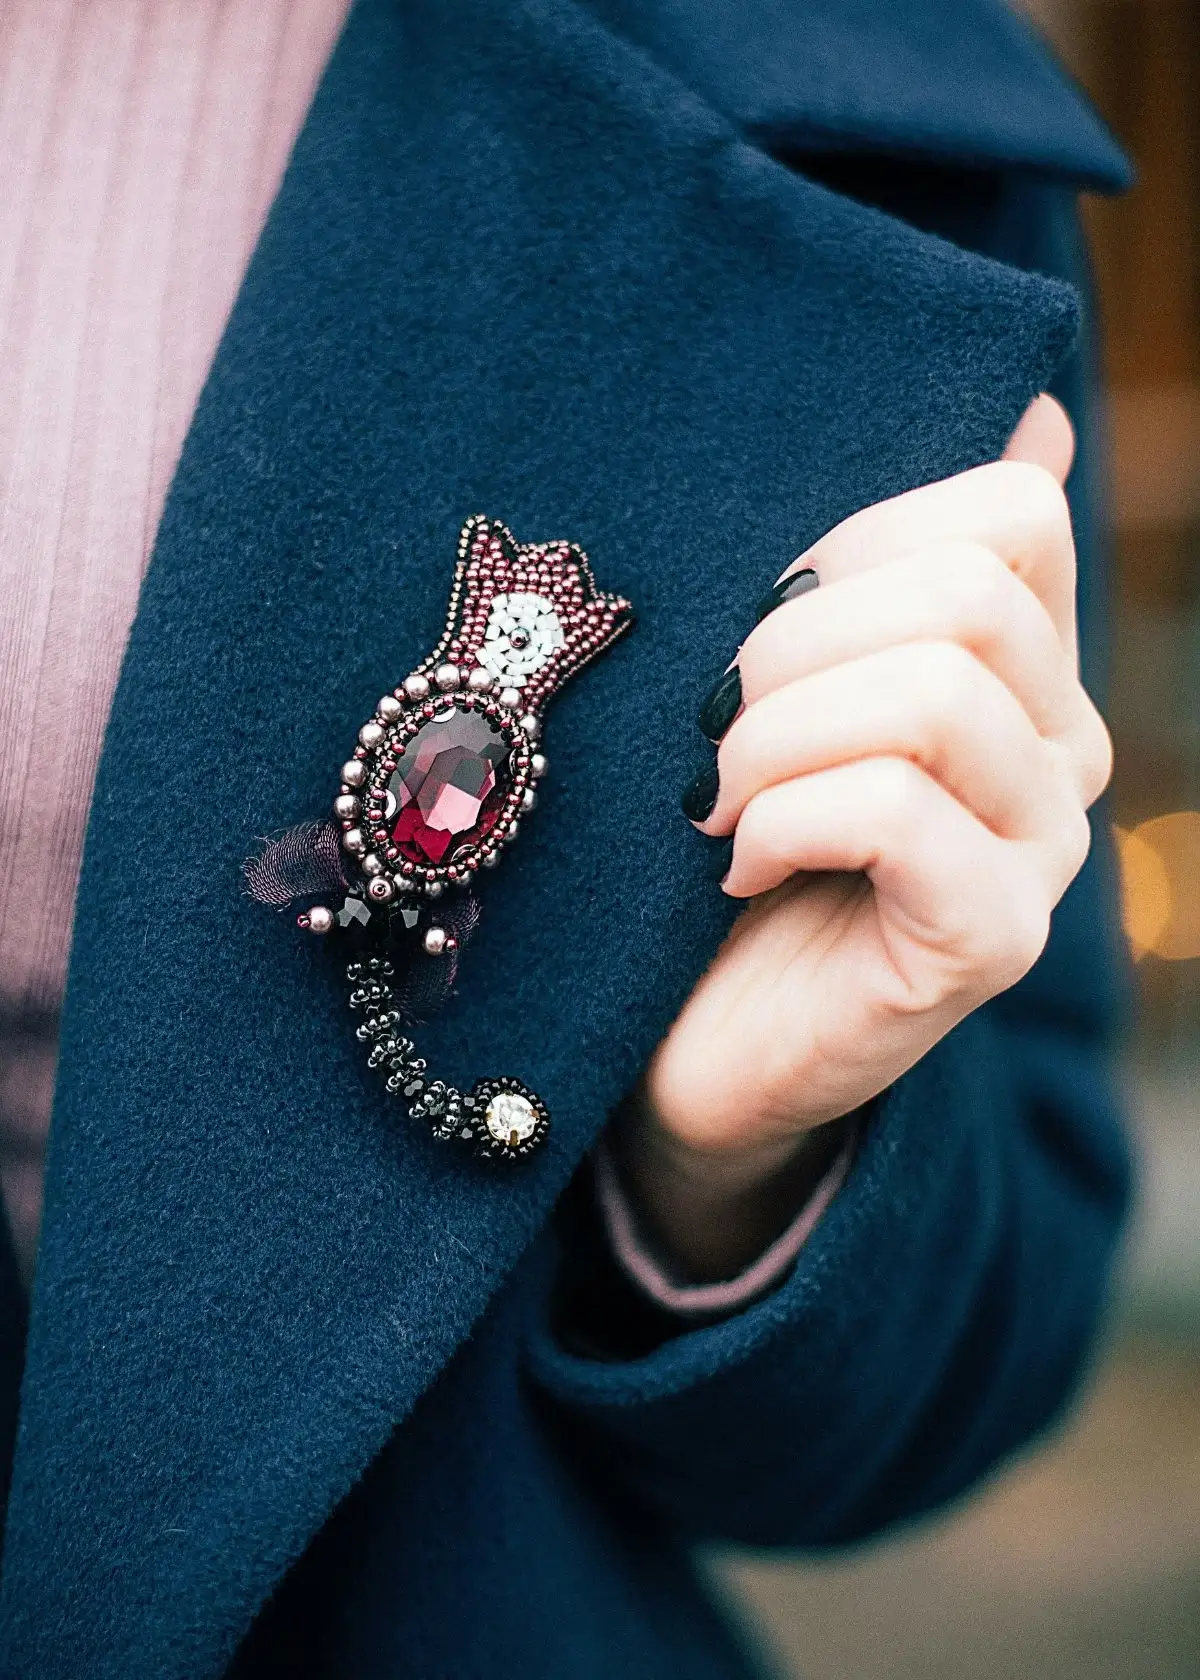 What styles and designs are popular in women's brooches?